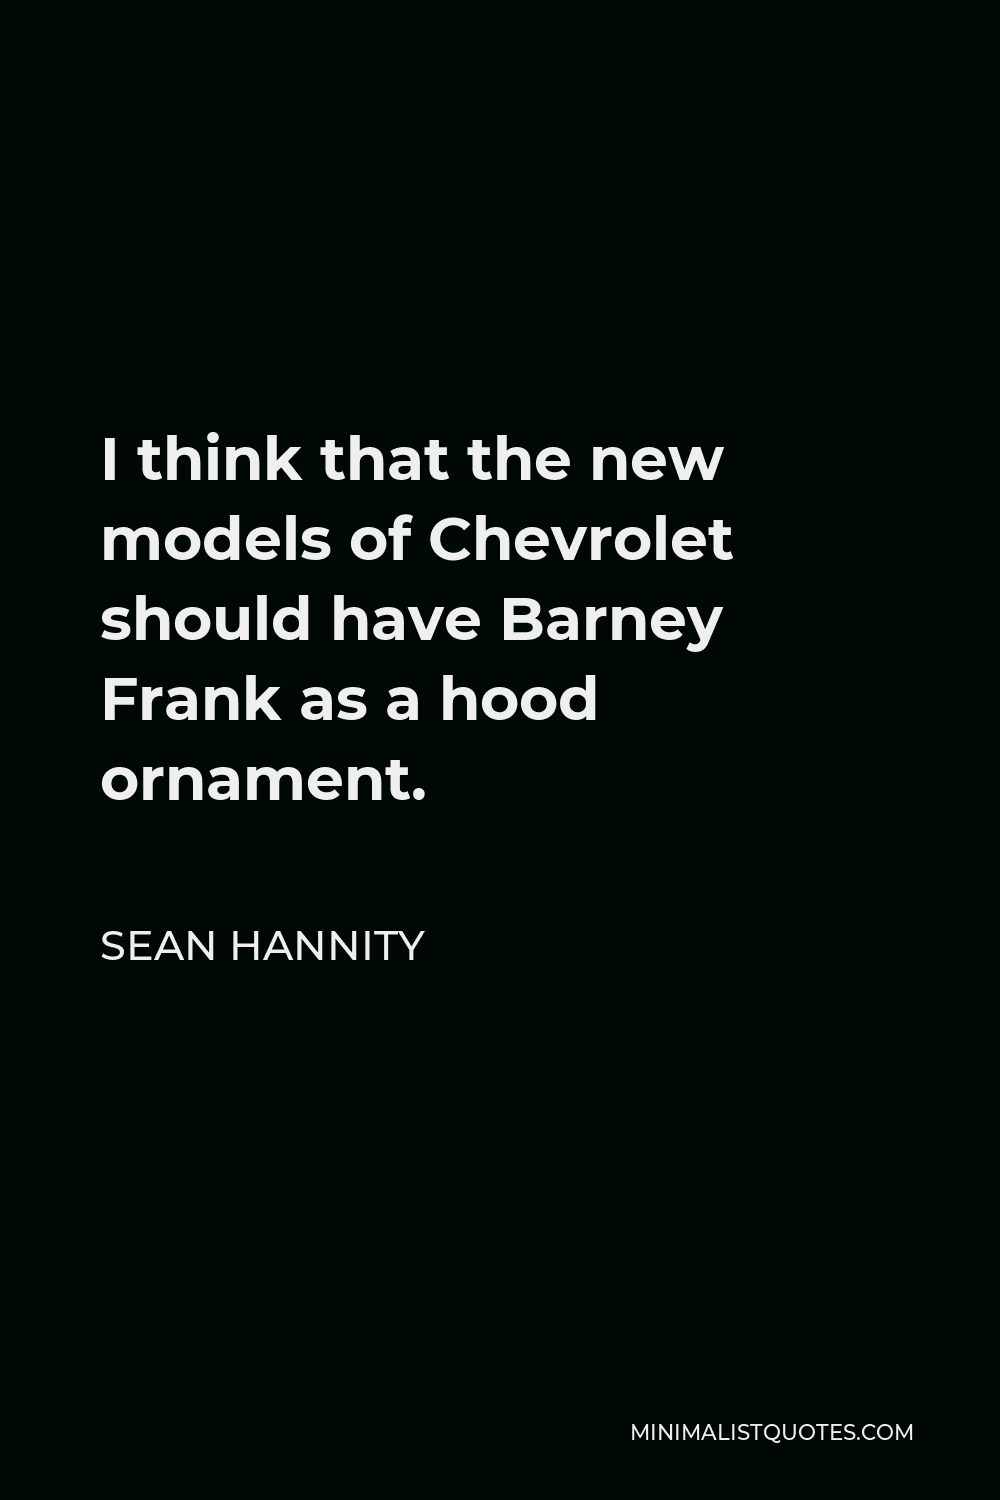 Sean Hannity Quote - I think that the new models of Chevrolet should have Barney Frank as a hood ornament.